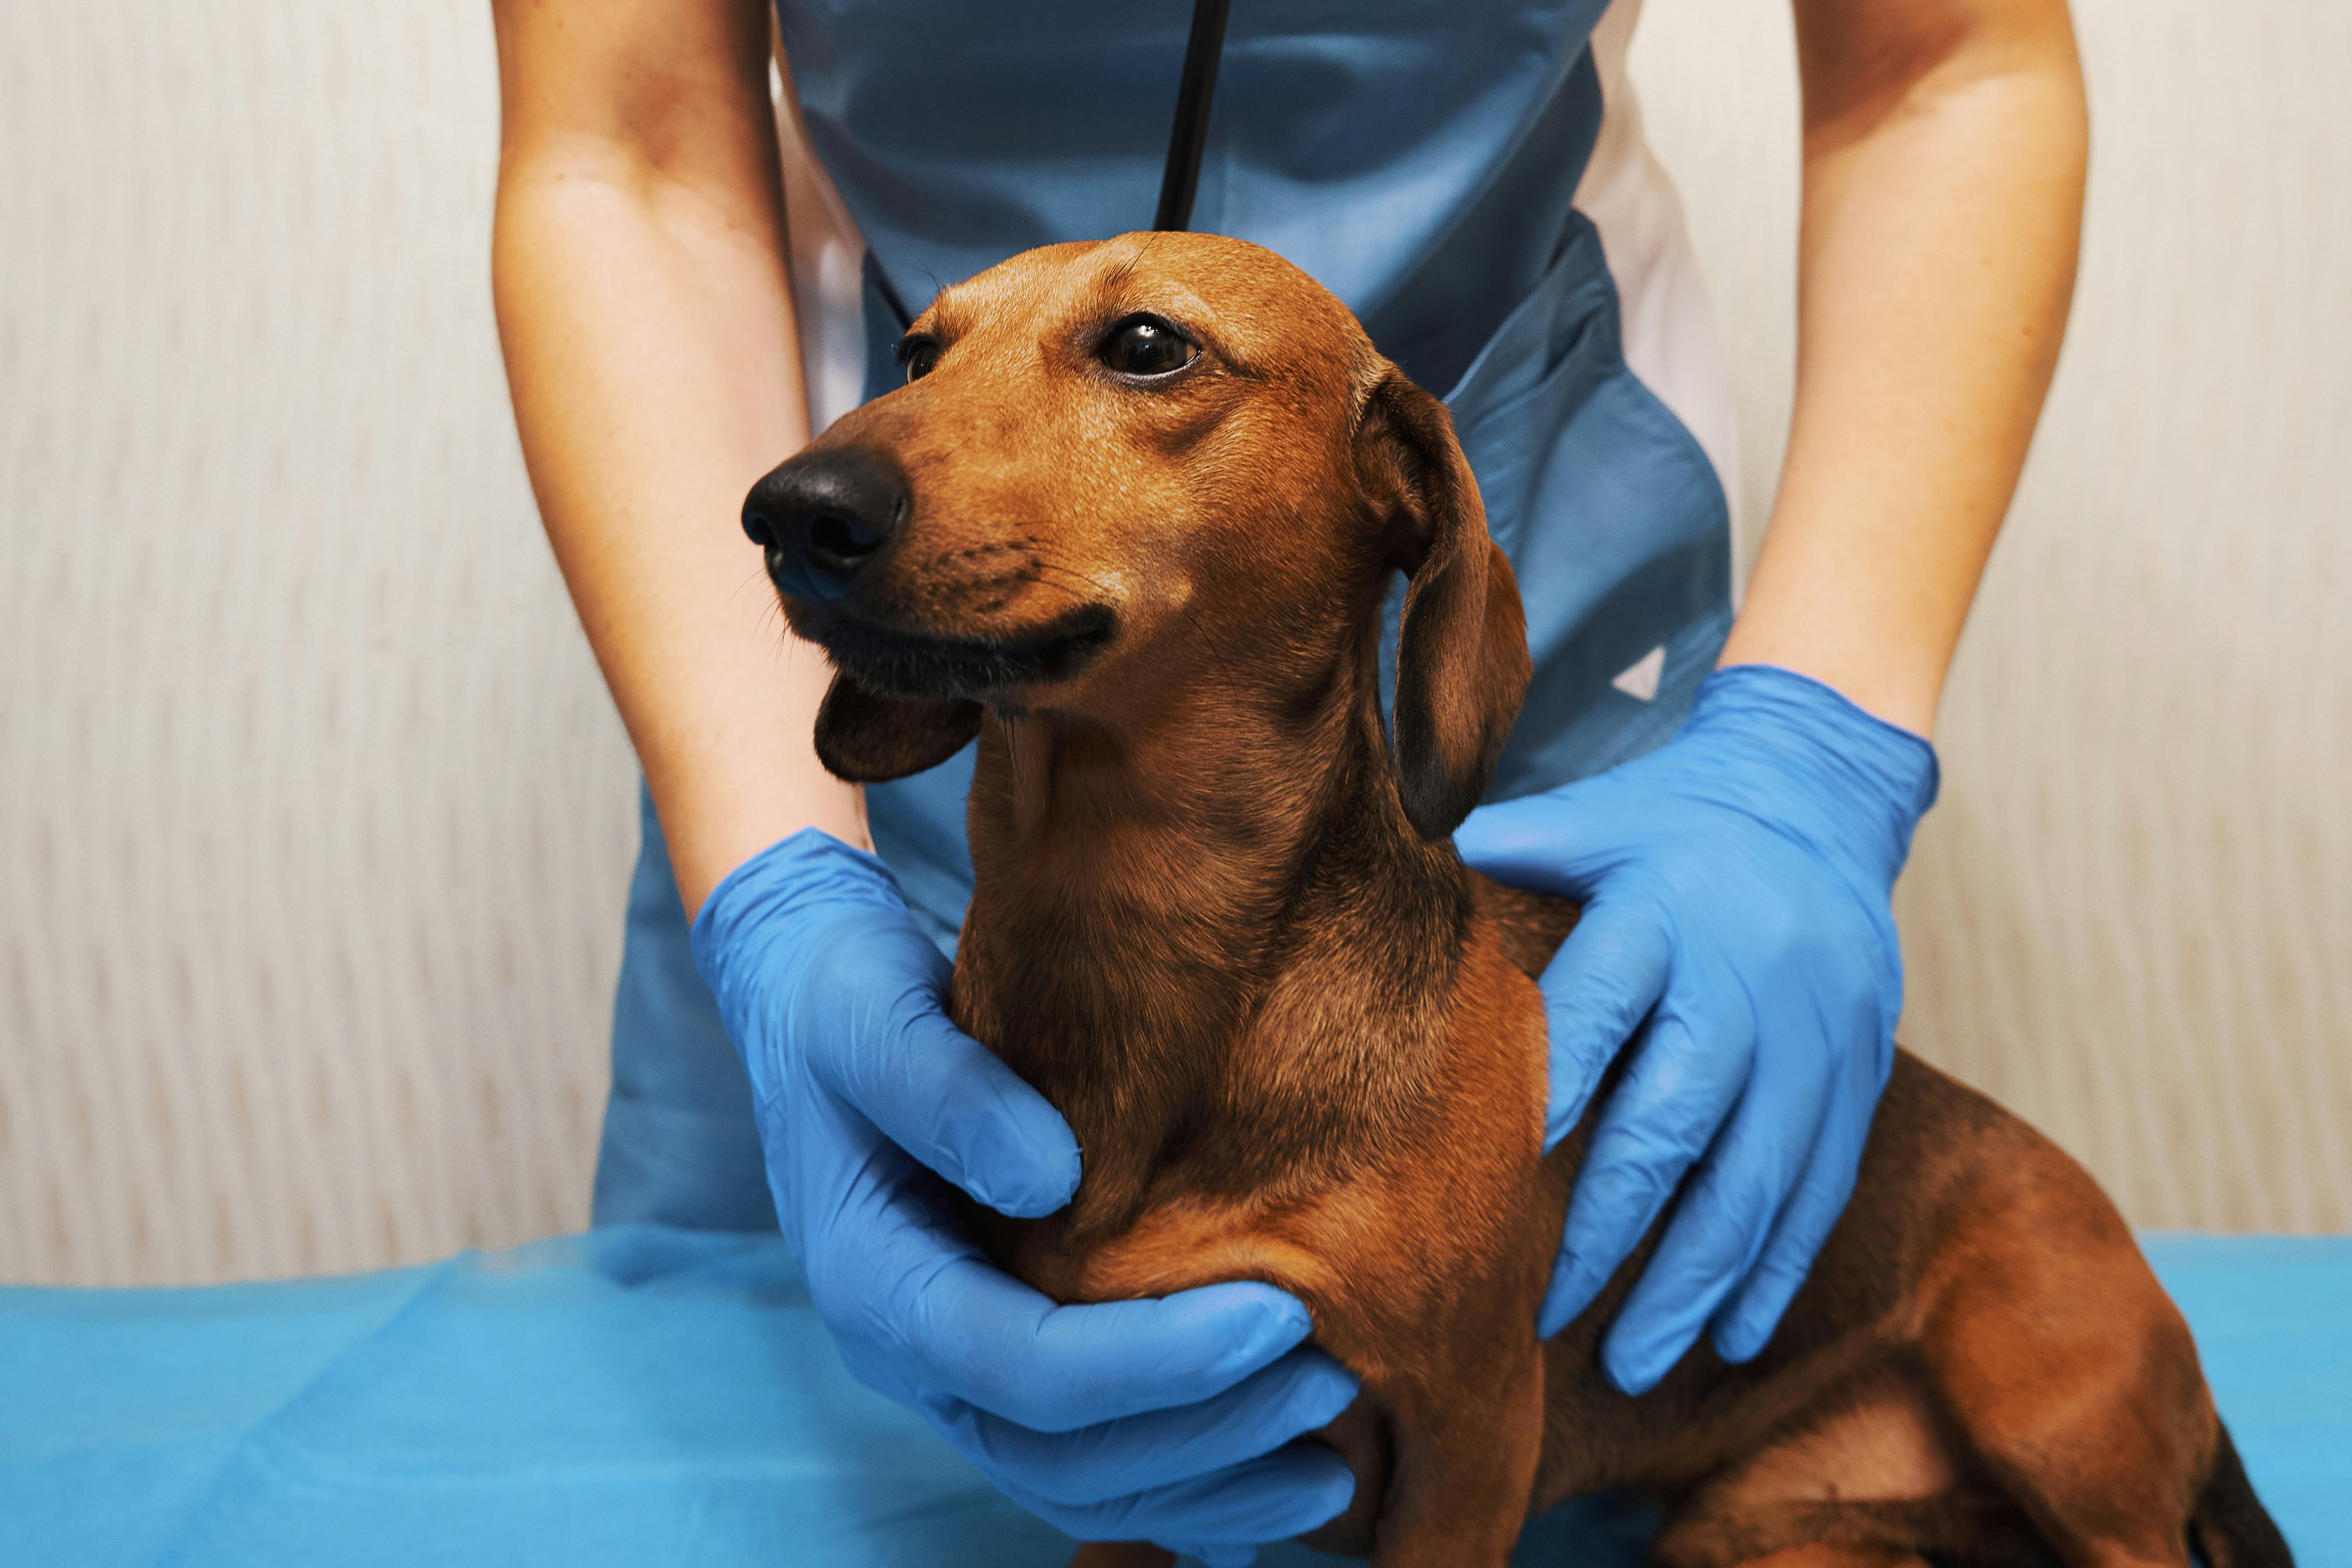 Dachshund being examined at a veterinary clinic.